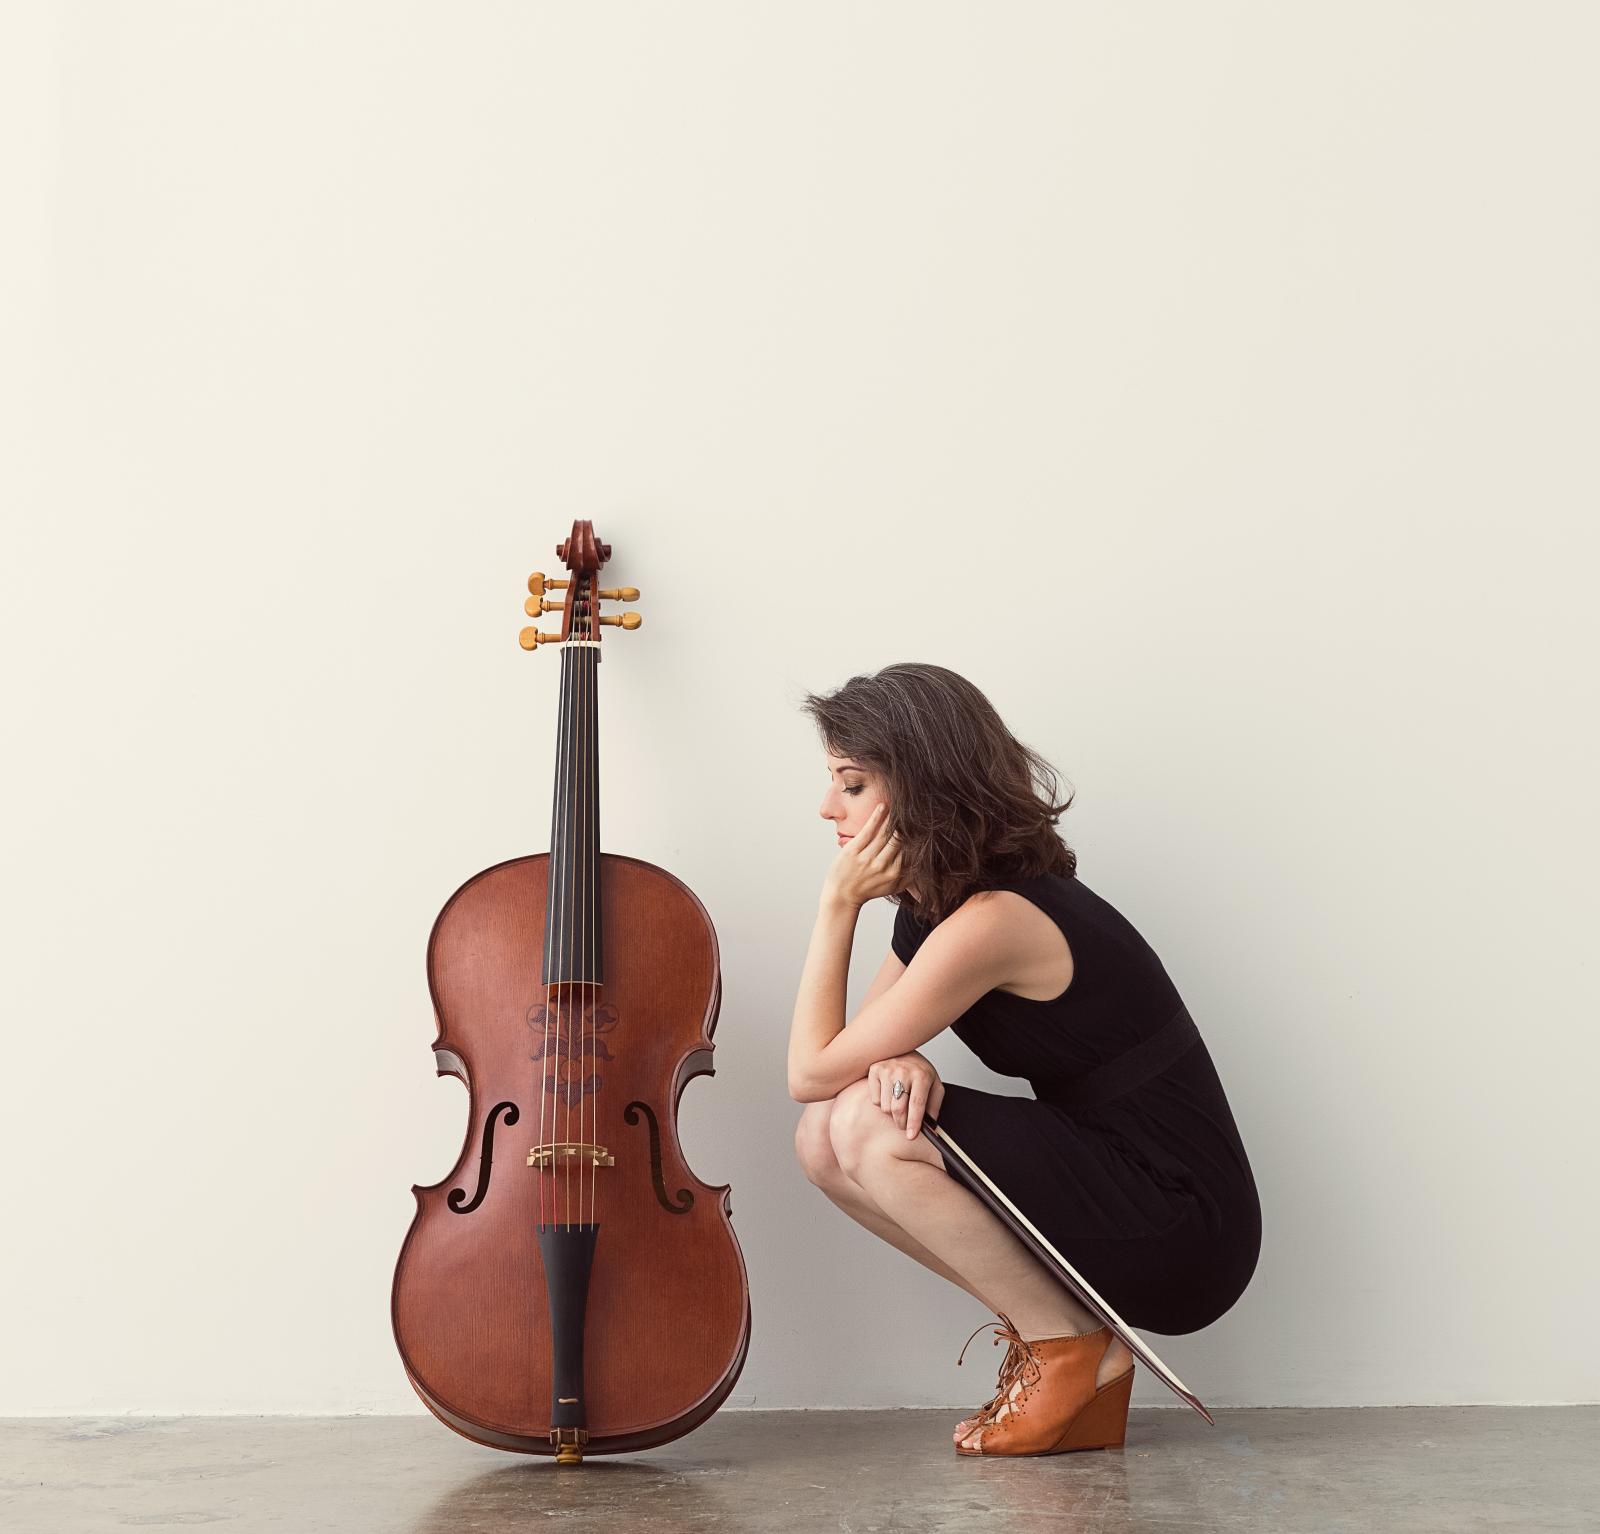 Elinor Frey with short brown hair in a black dress and brown shoes crouching by cello